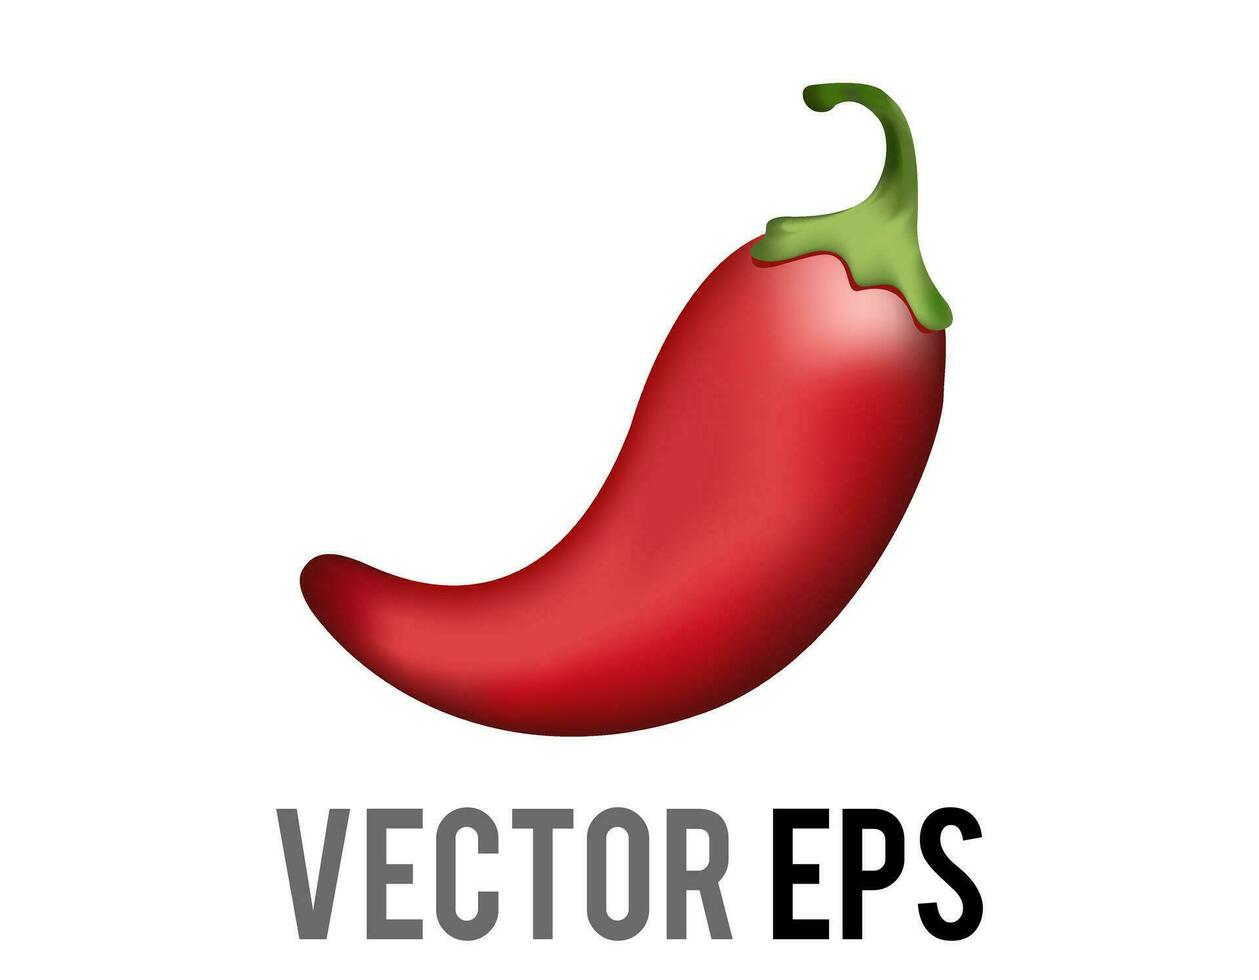 vector red curled Mexican chili pepper icon with green stem